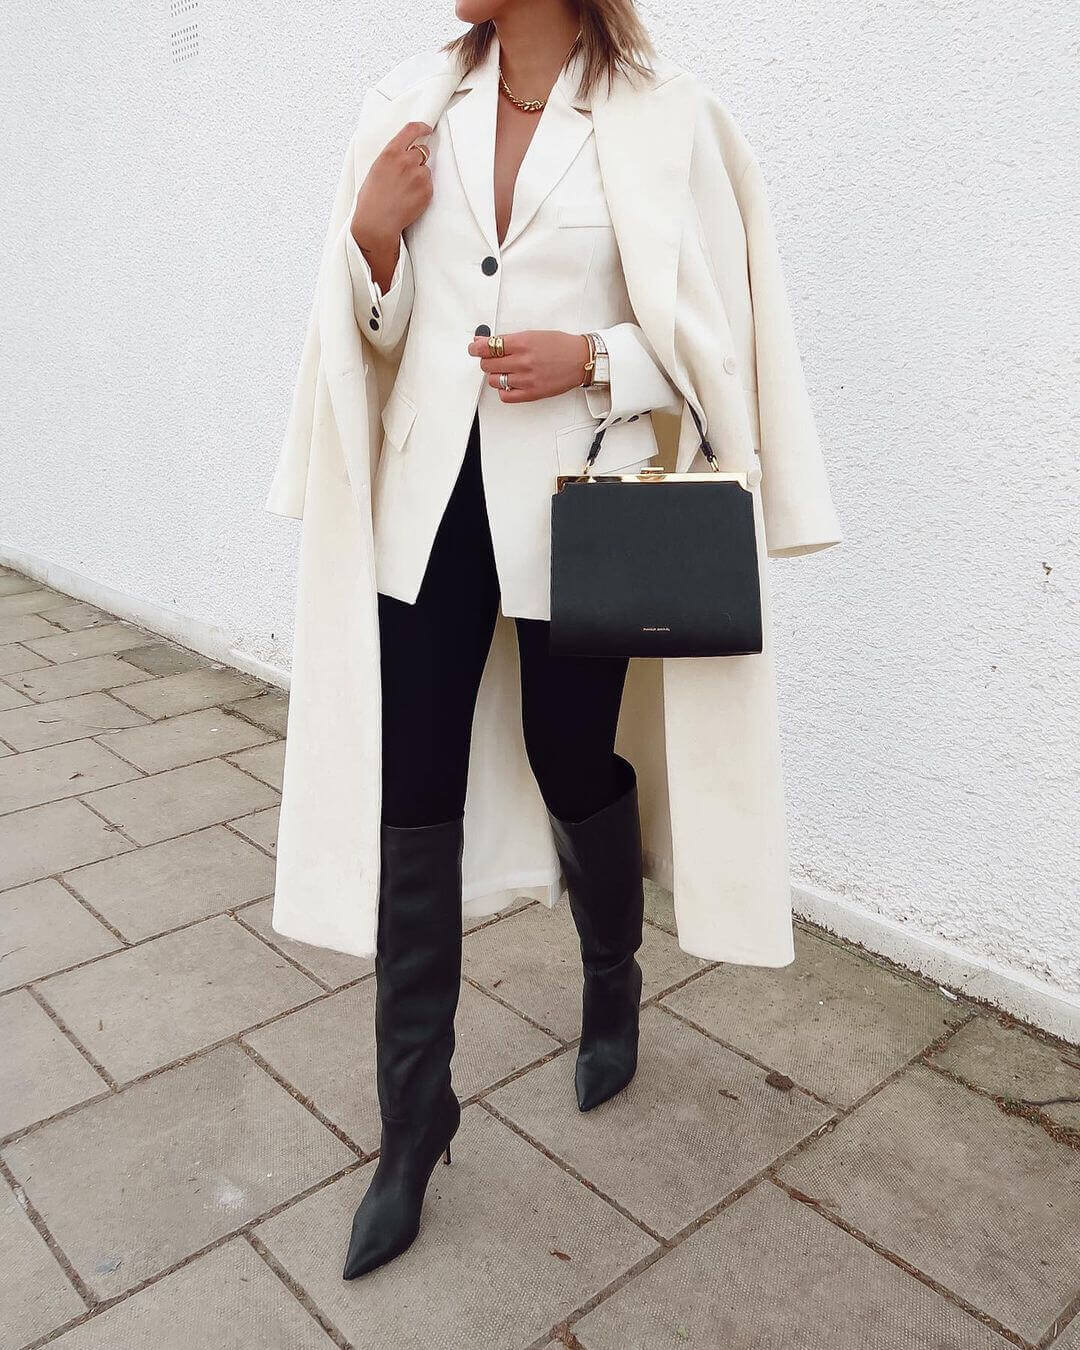 10 Winter Outfits To Spice Up Your Workwear Wardrobe